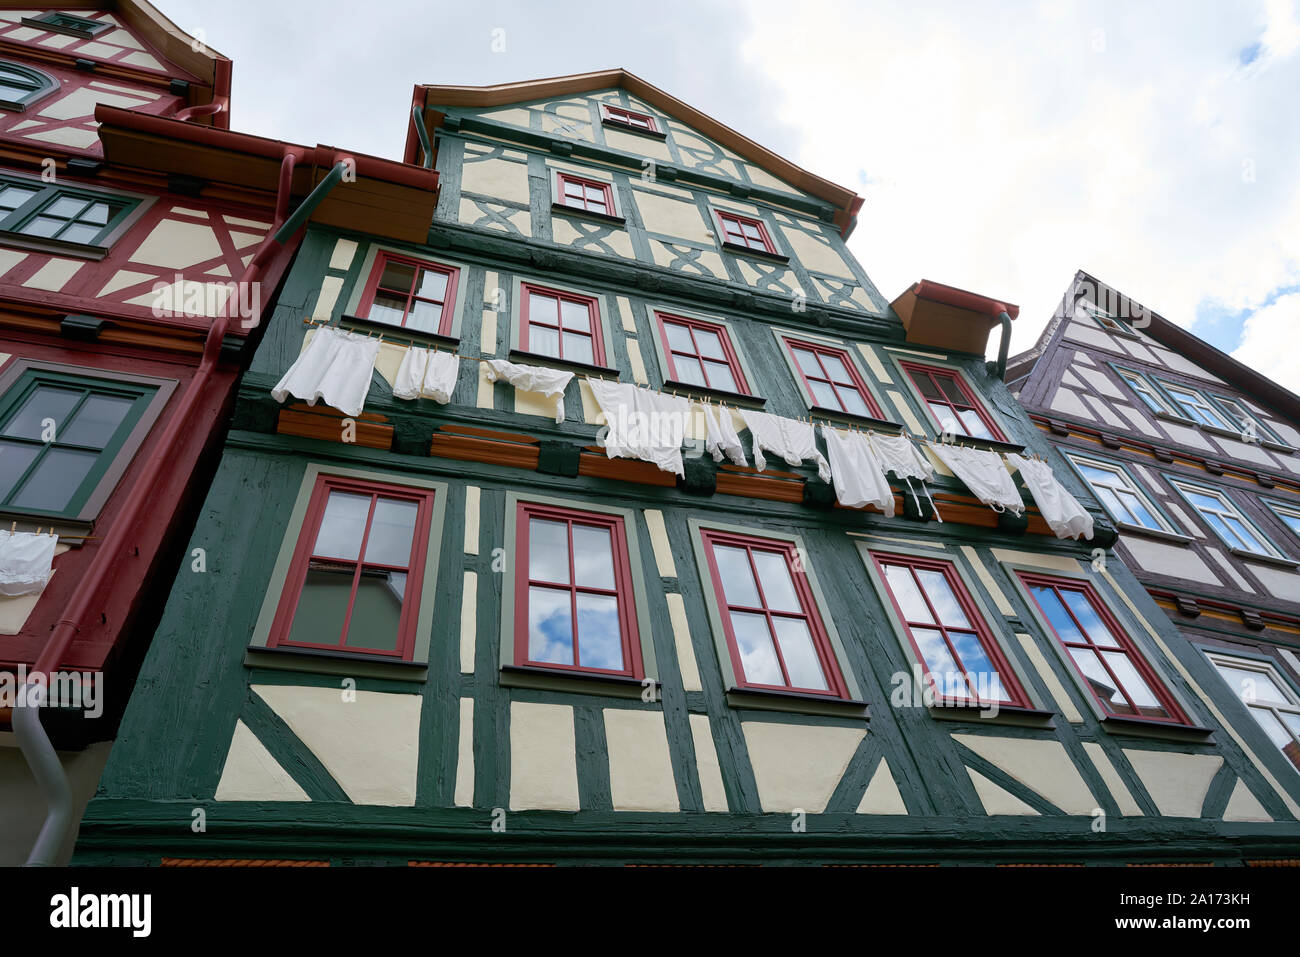 Clothesline on a half-timbered house in the historic old town of Schmalkalden in Thuringia in Germany Stock Photo